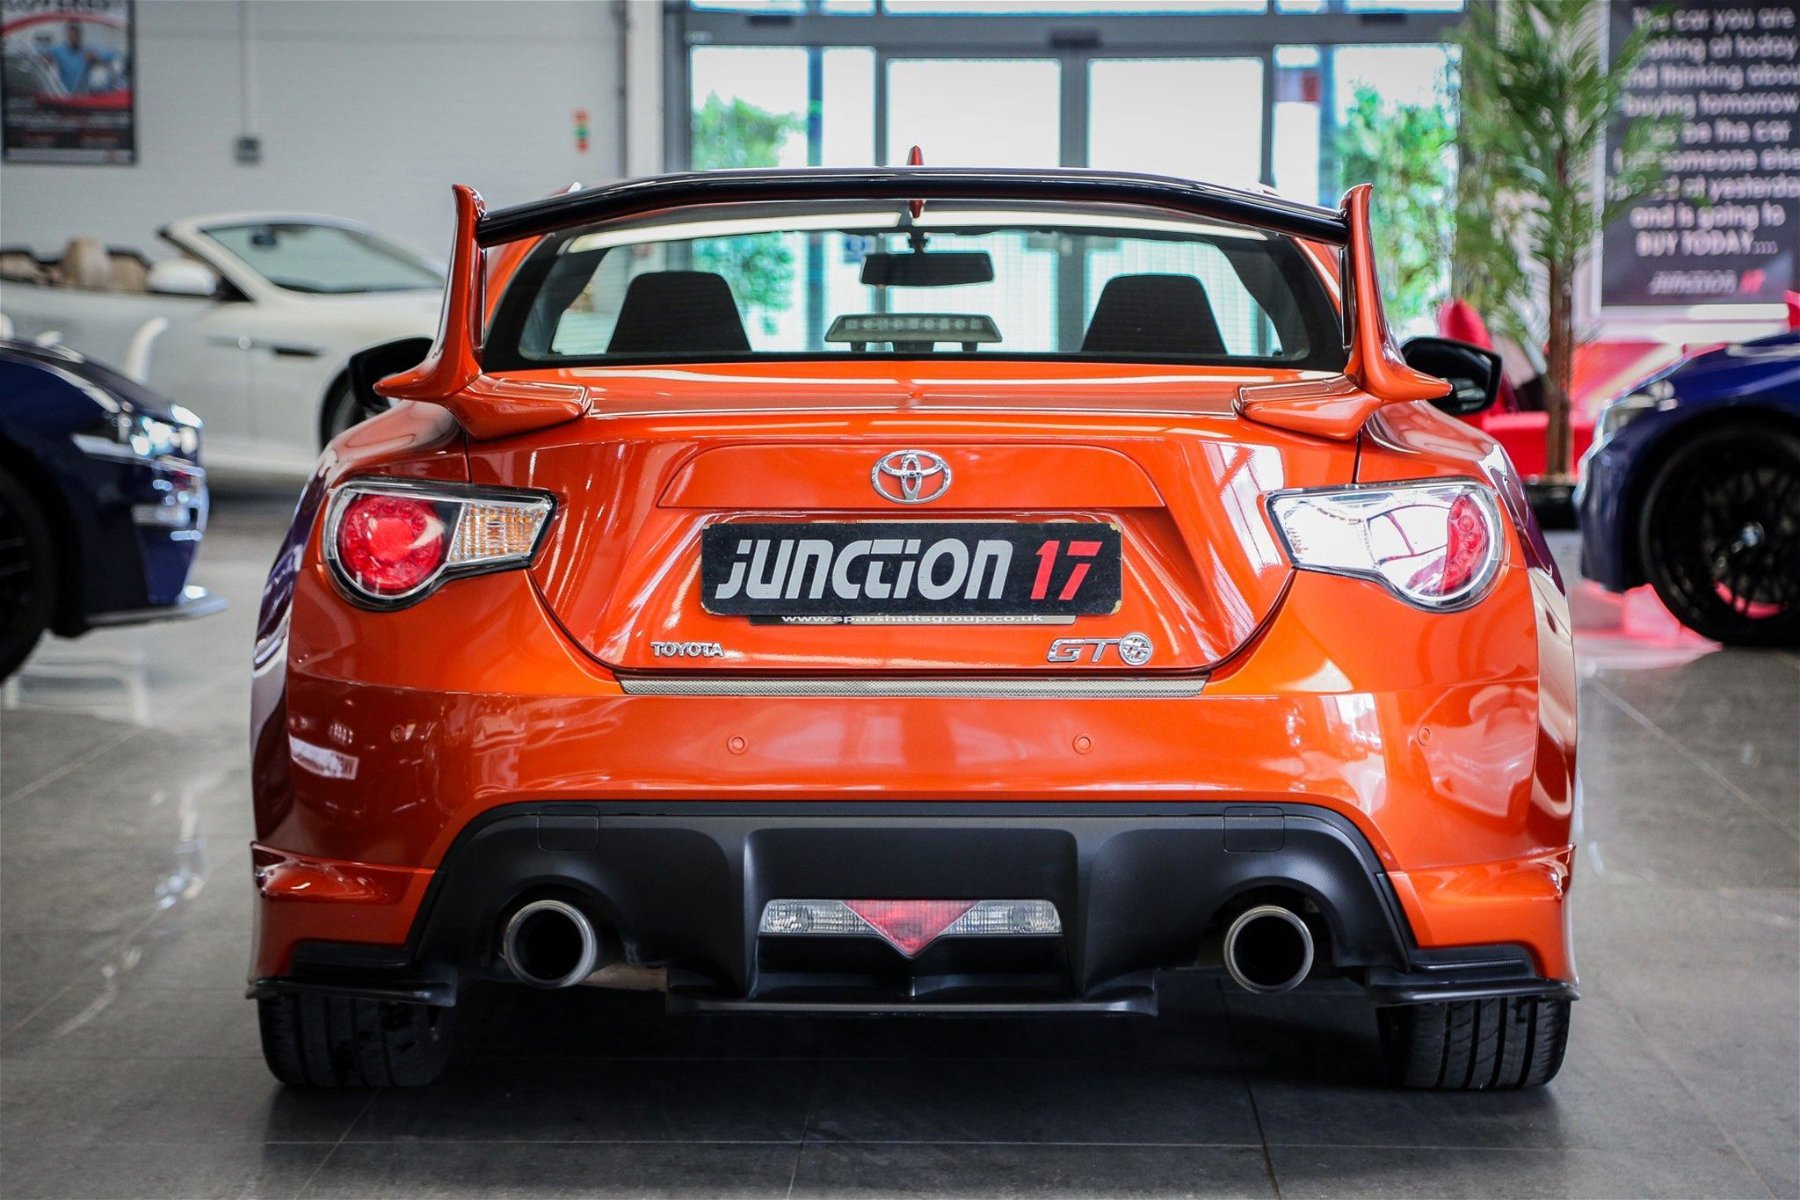 Toyota Gt86 for sale in Peterborough - Part Exchange Welcome